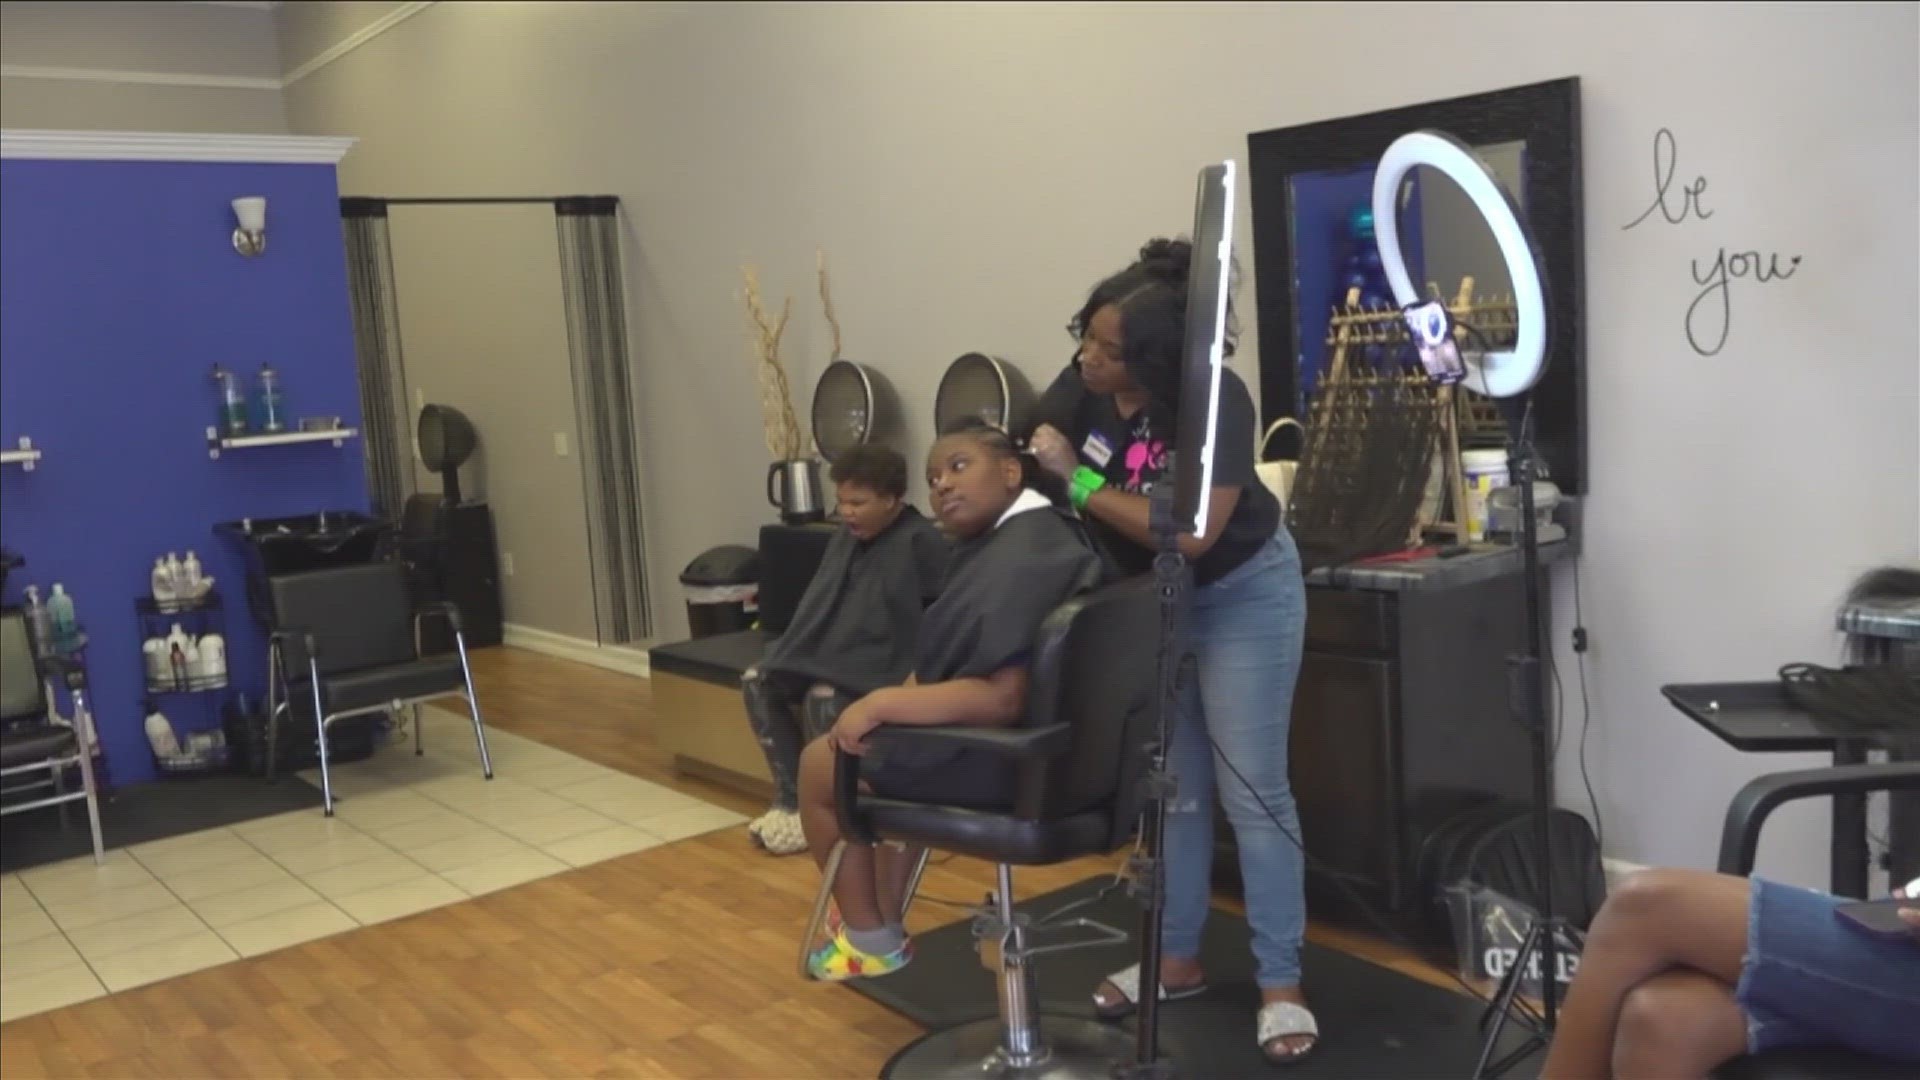 Hair Angel Love Salon hosted a back-to-school event providing life lessons as well as haircuts.